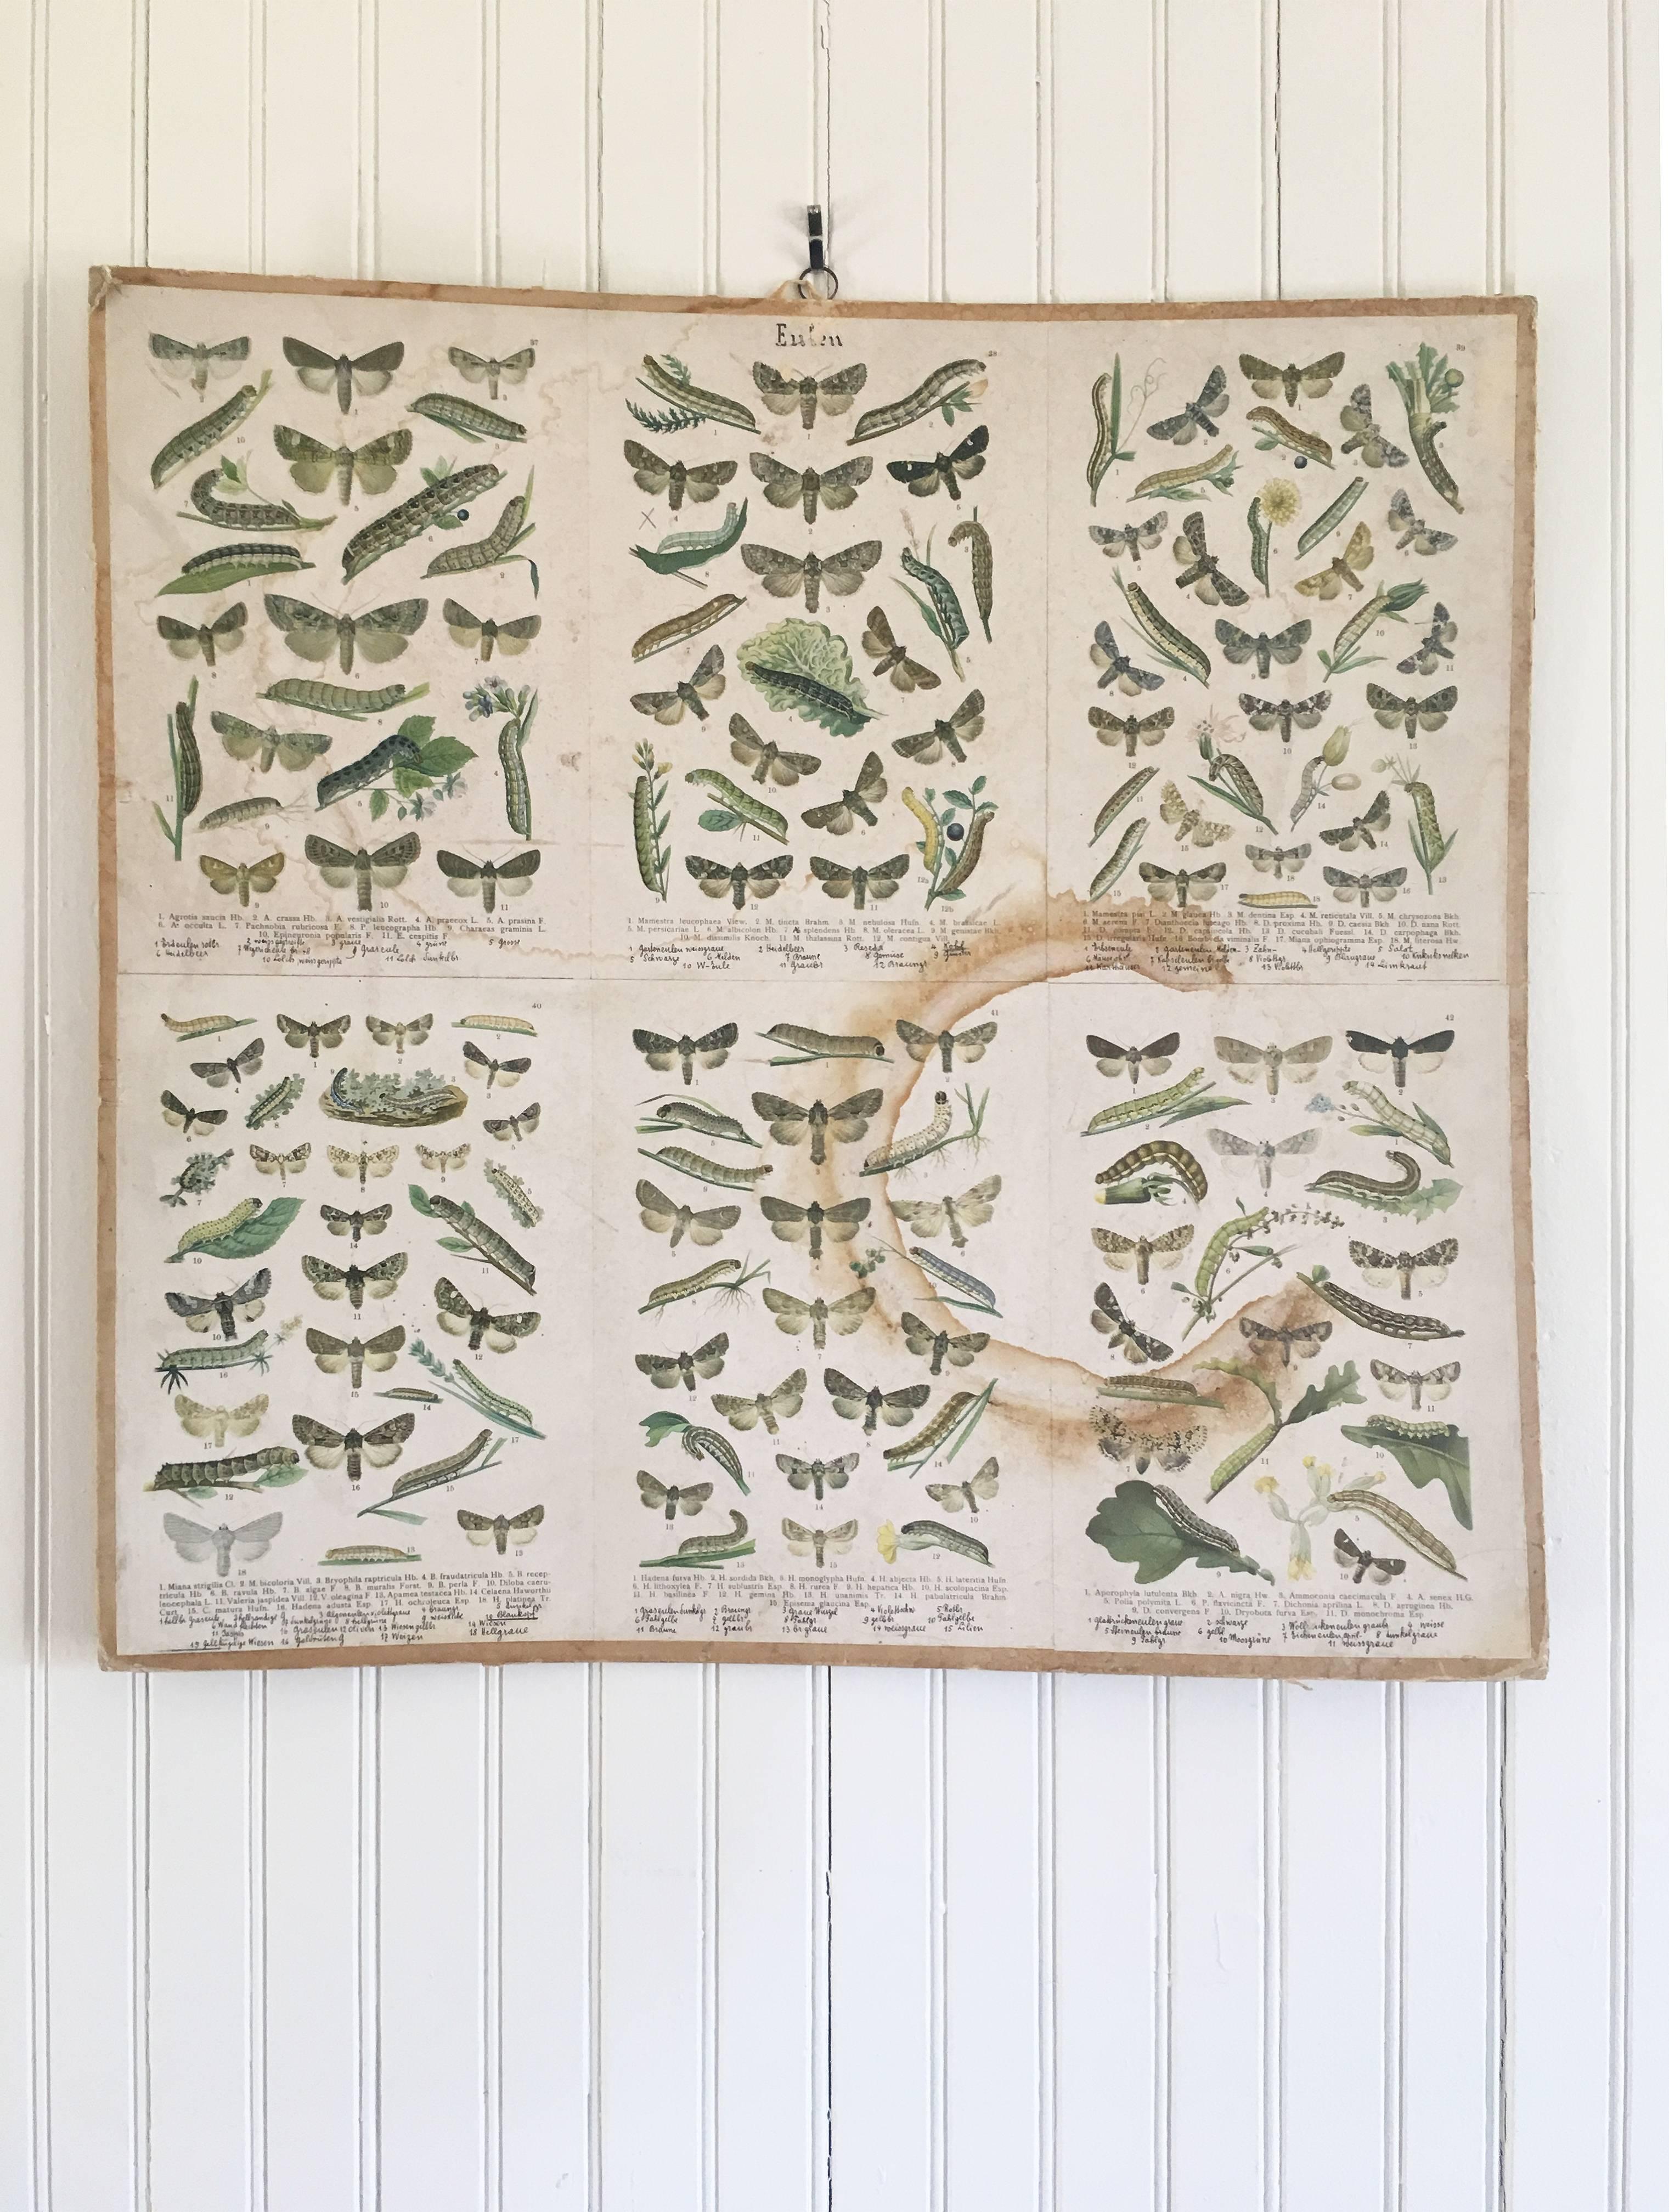 Vintage educational butterfly prints from Germany. Each print has a hard paper board backing and hook for hanging. (Each sold separately). Vintage condition with minor wear consistent with age and use.

